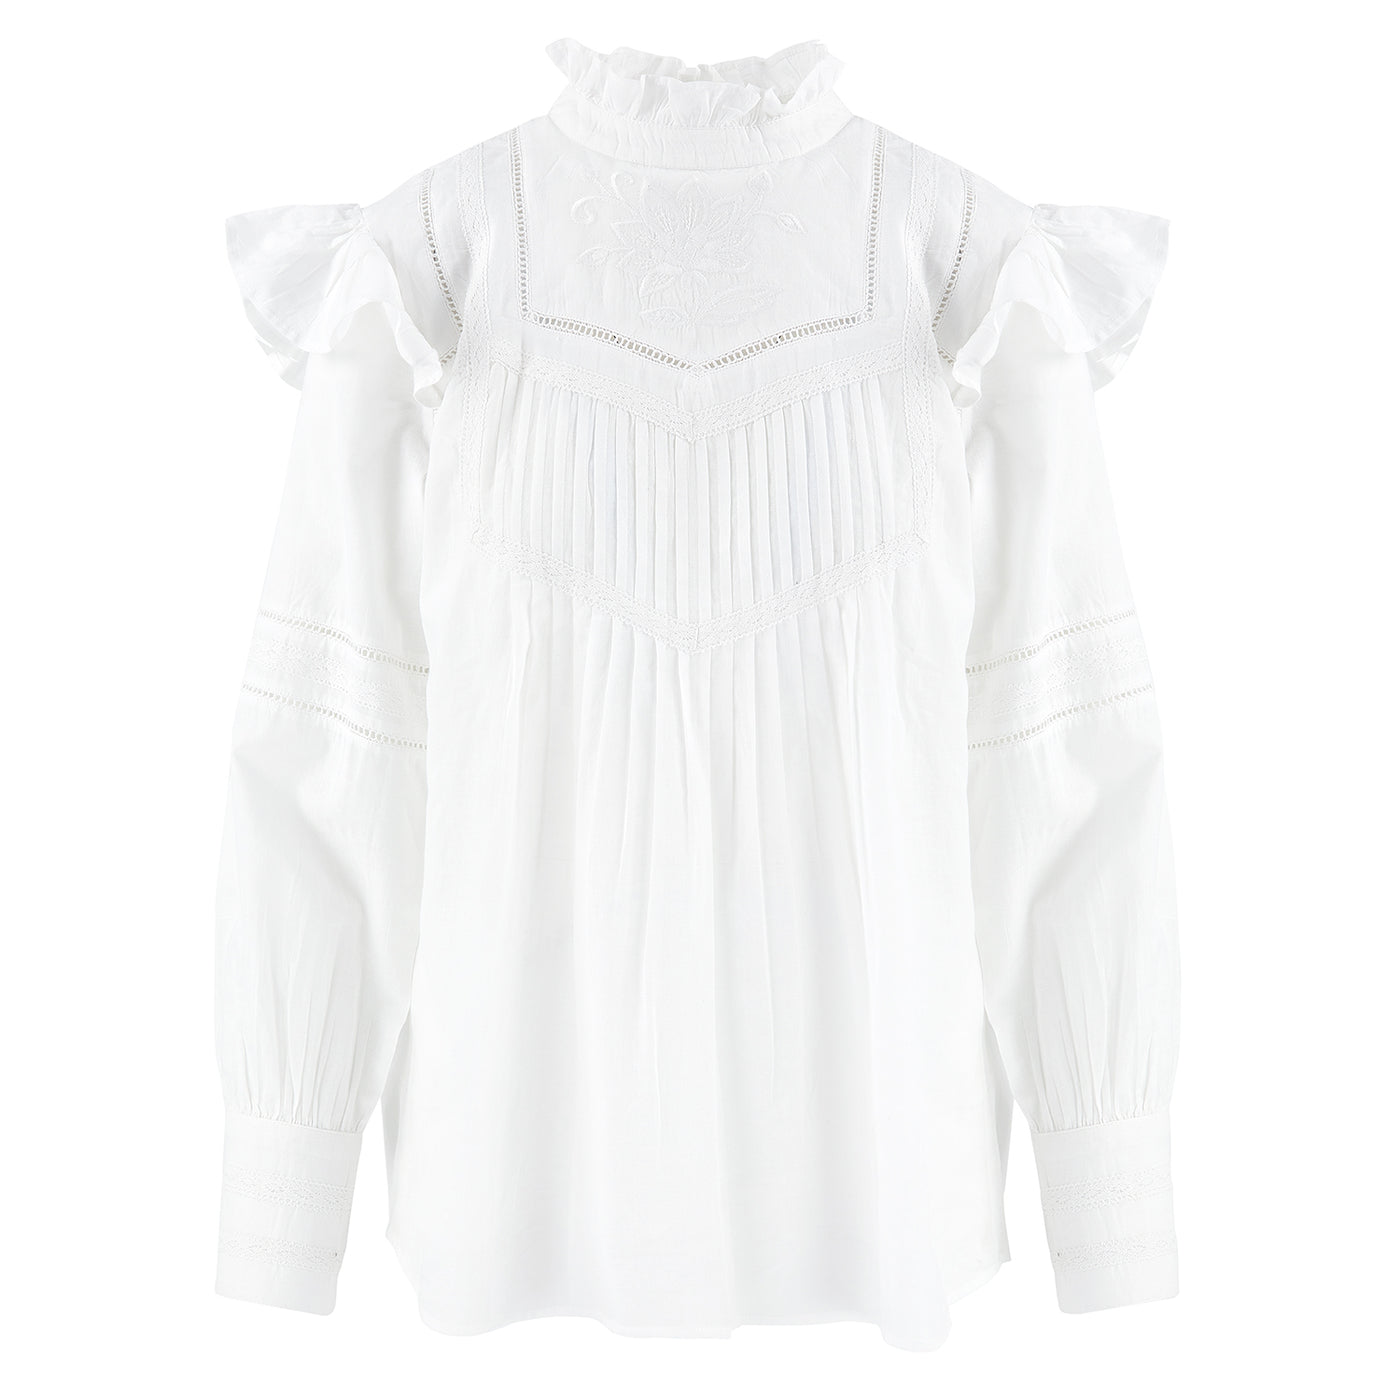 Shalina Embroidered Top in White